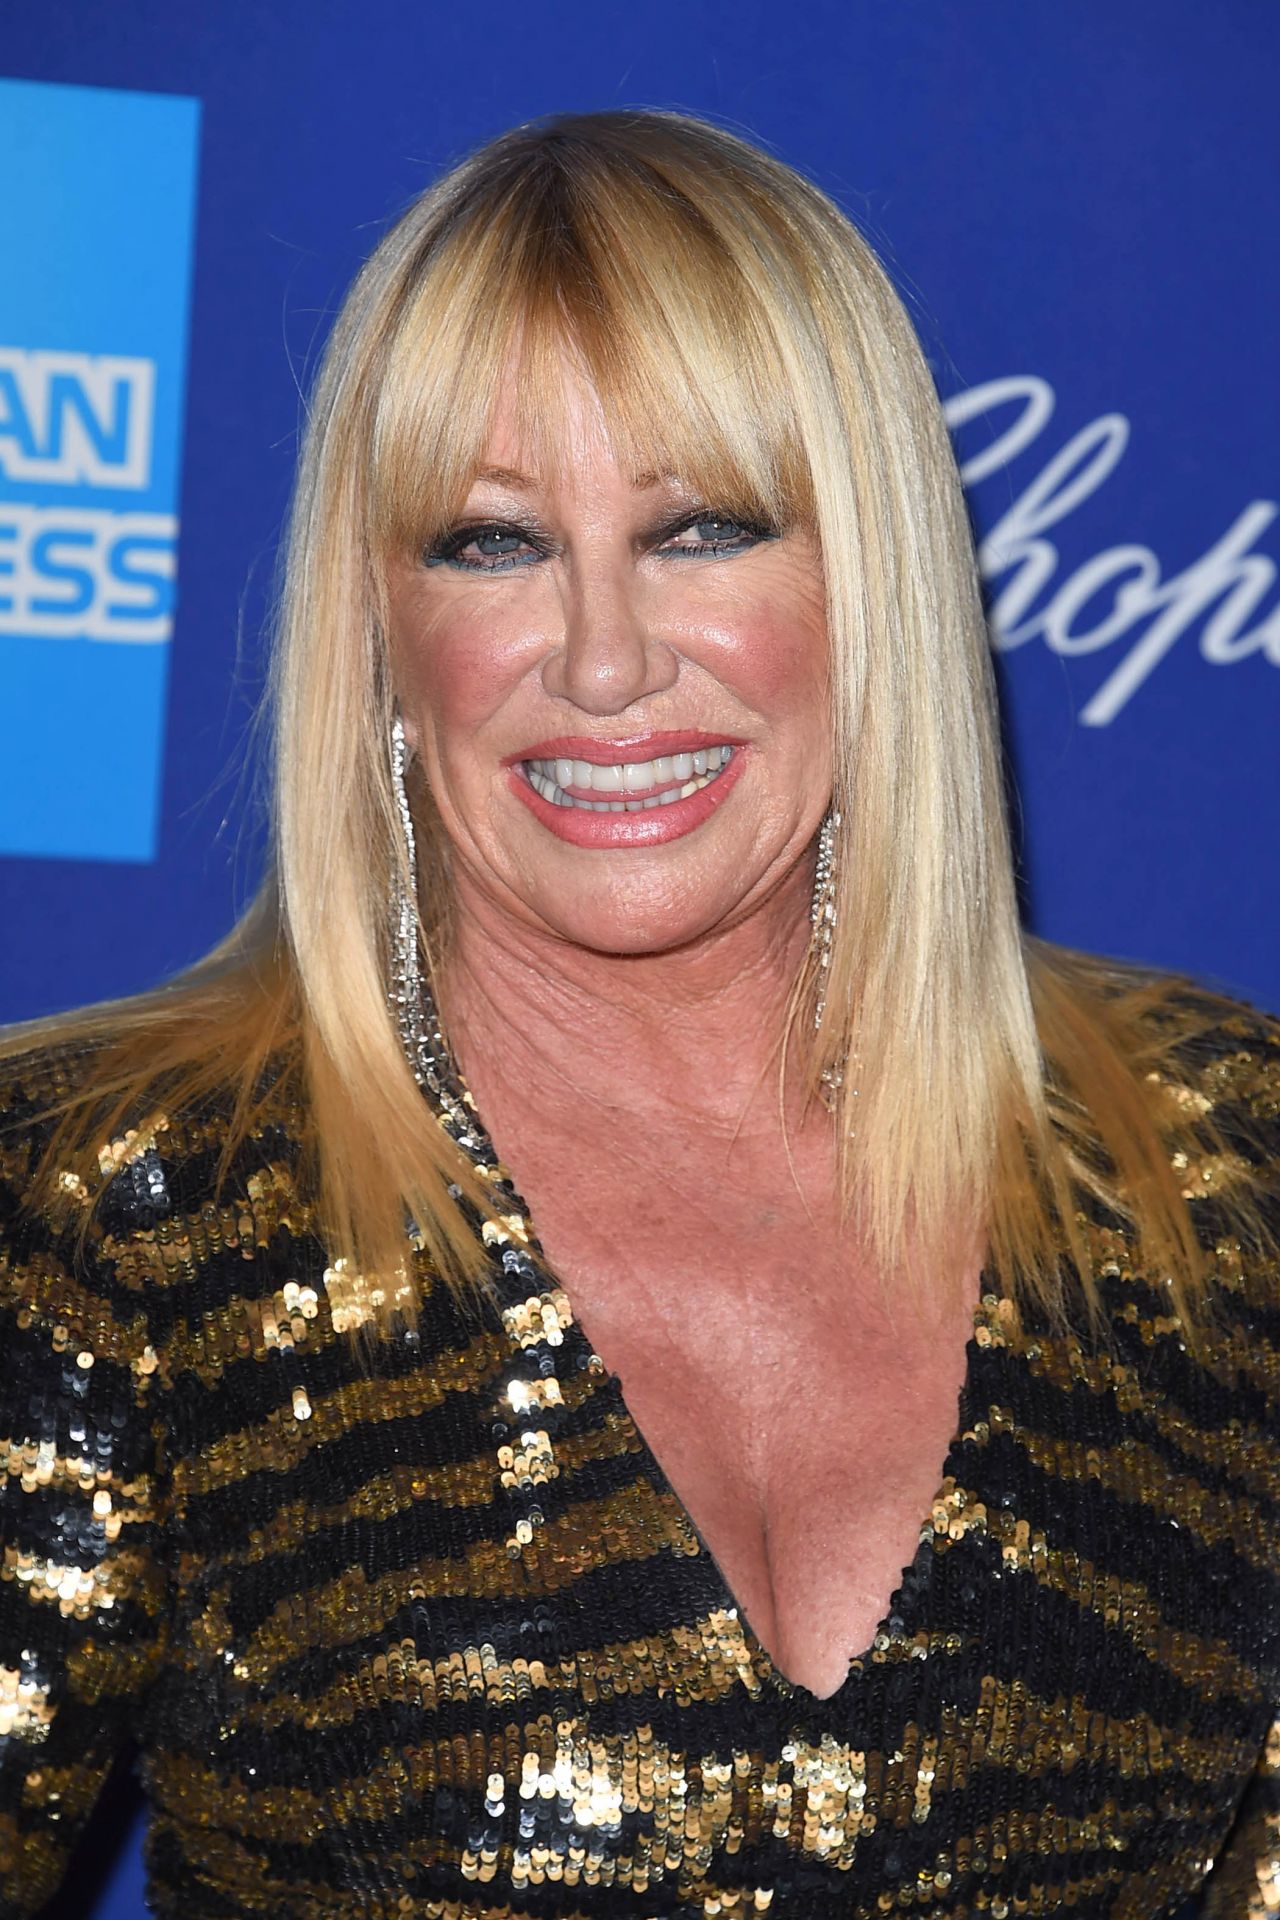 Suzanne Somers Palm Springs International Film Festival Awards